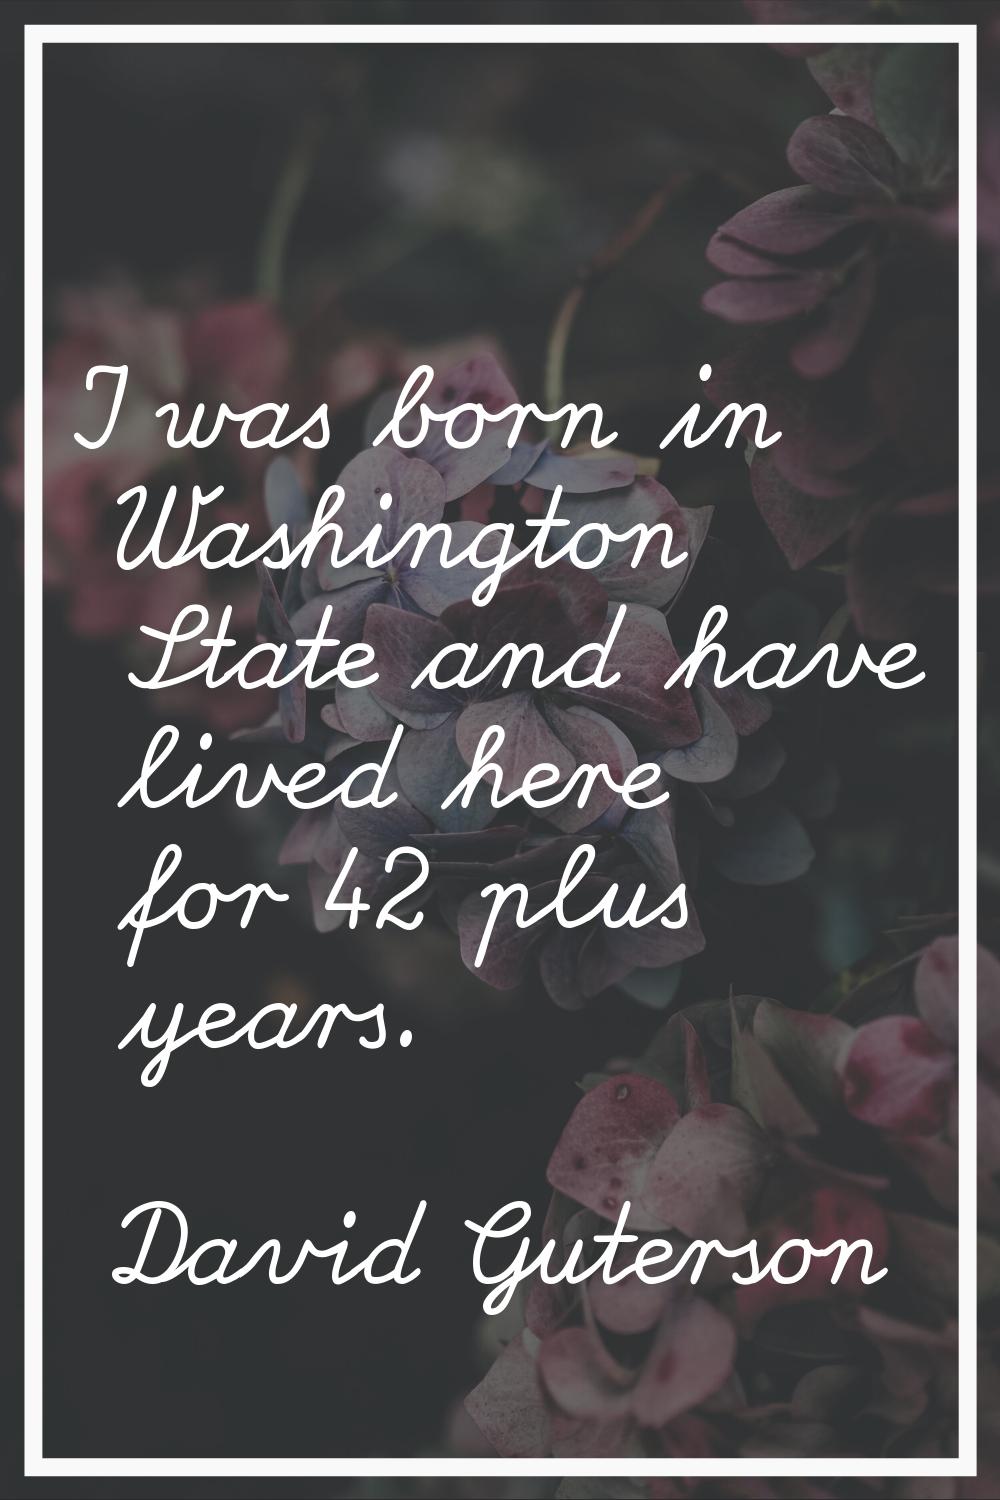 I was born in Washington State and have lived here for 42 plus years.